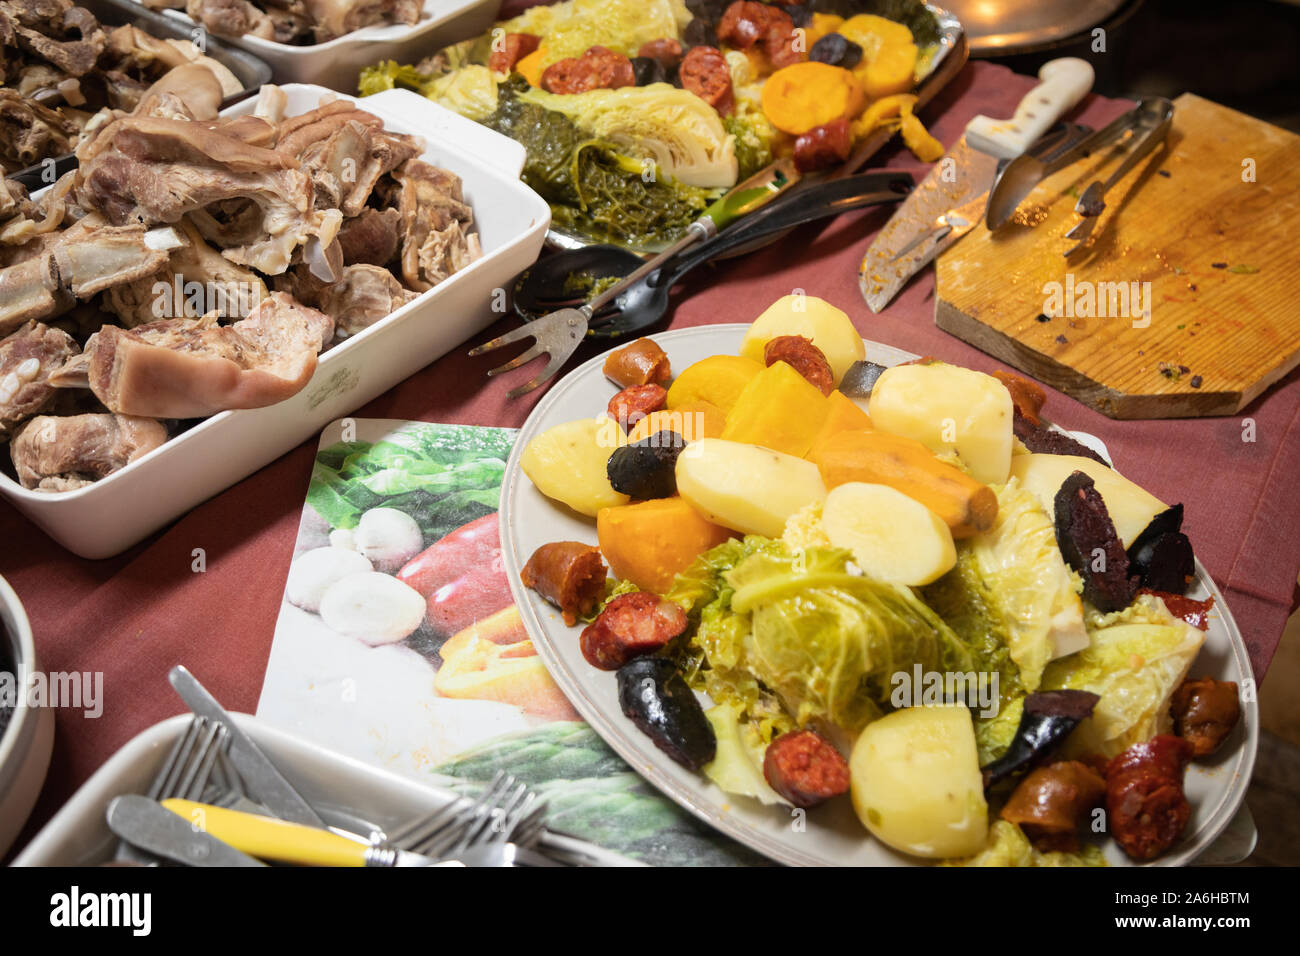 Cozido à portuguesa or Portuguese boiled dinner is a type of cozido, traditional Portuguese stew. Numerous regional variations exist throughout Portug Stock Photo